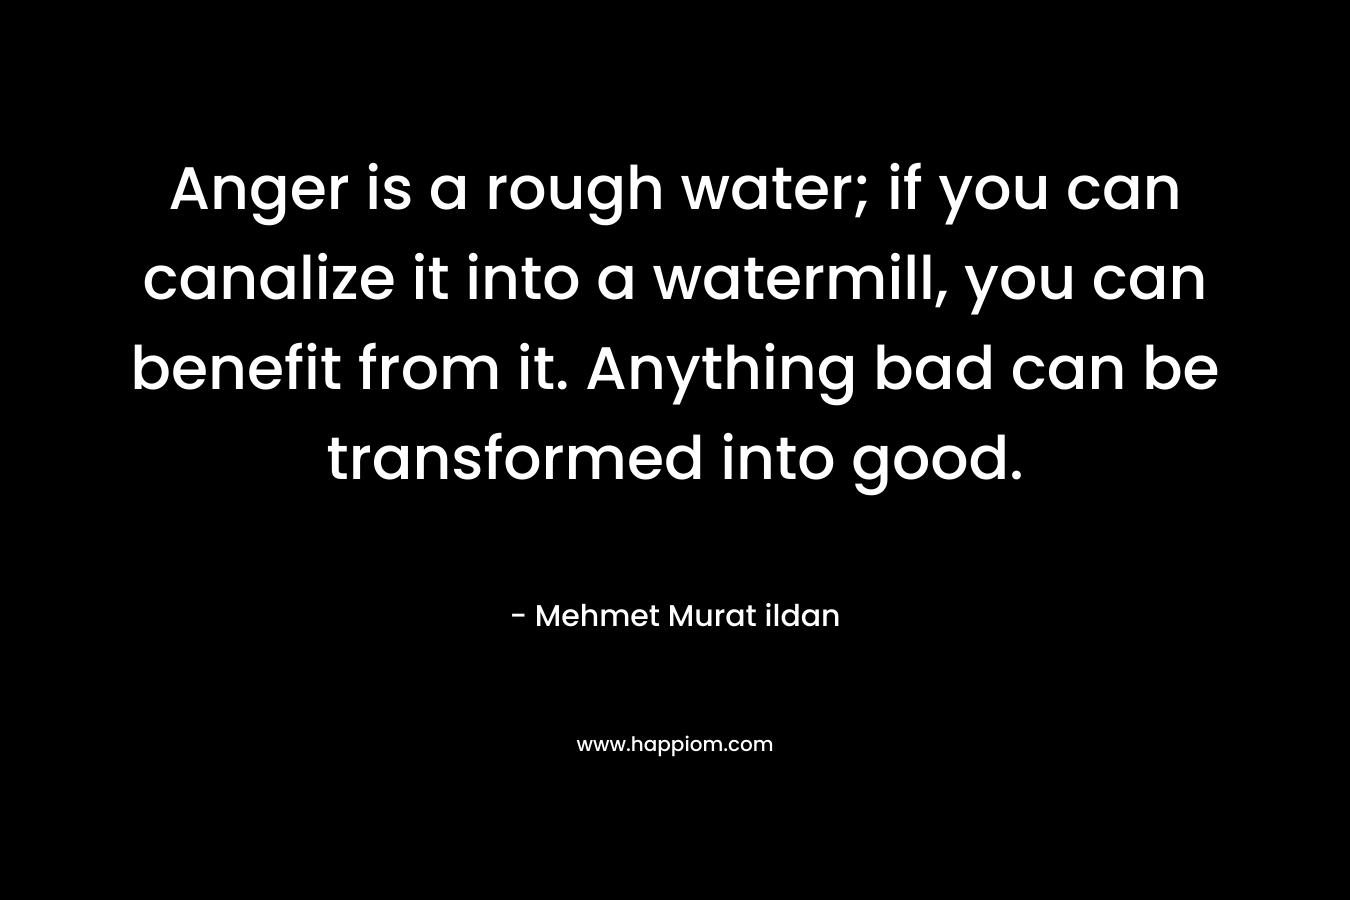 Anger is a rough water; if you can canalize it into a watermill, you can benefit from it. Anything bad can be transformed into good. – Mehmet Murat ildan